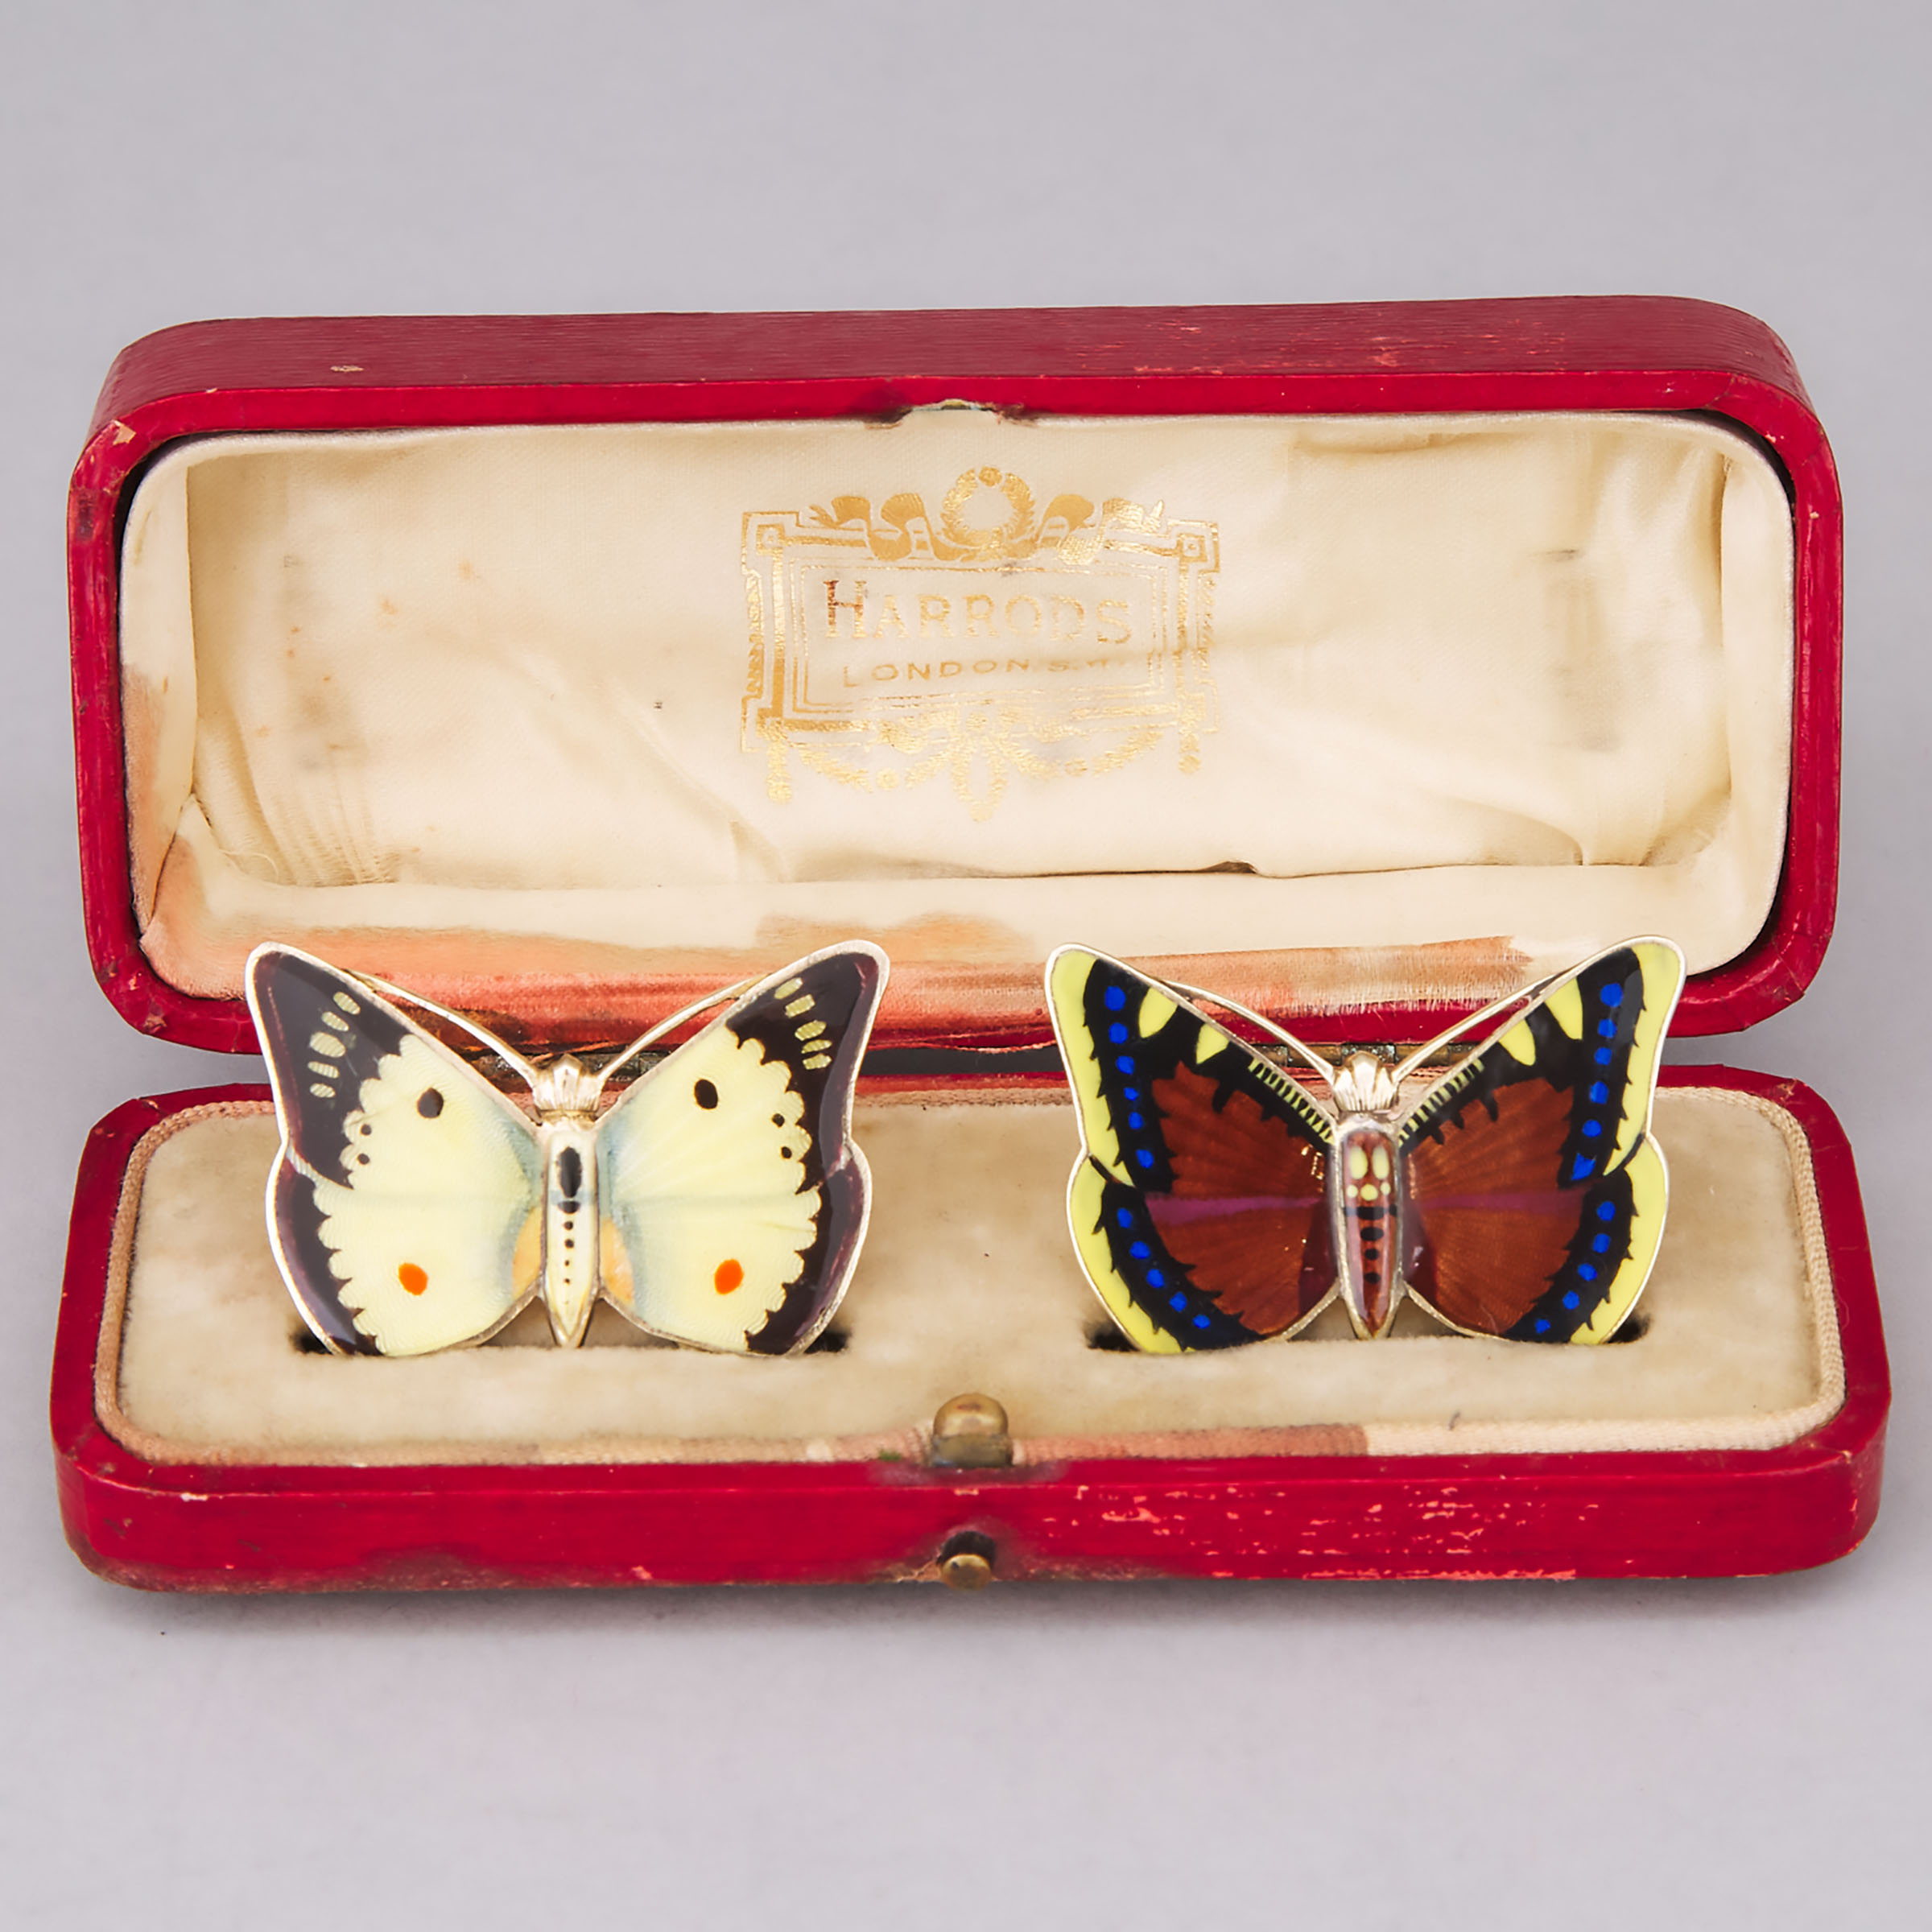 Pair of English Enameled Silver-Gilt Butterfly Place-Card Holders, Cohen & Charles, London, 1911